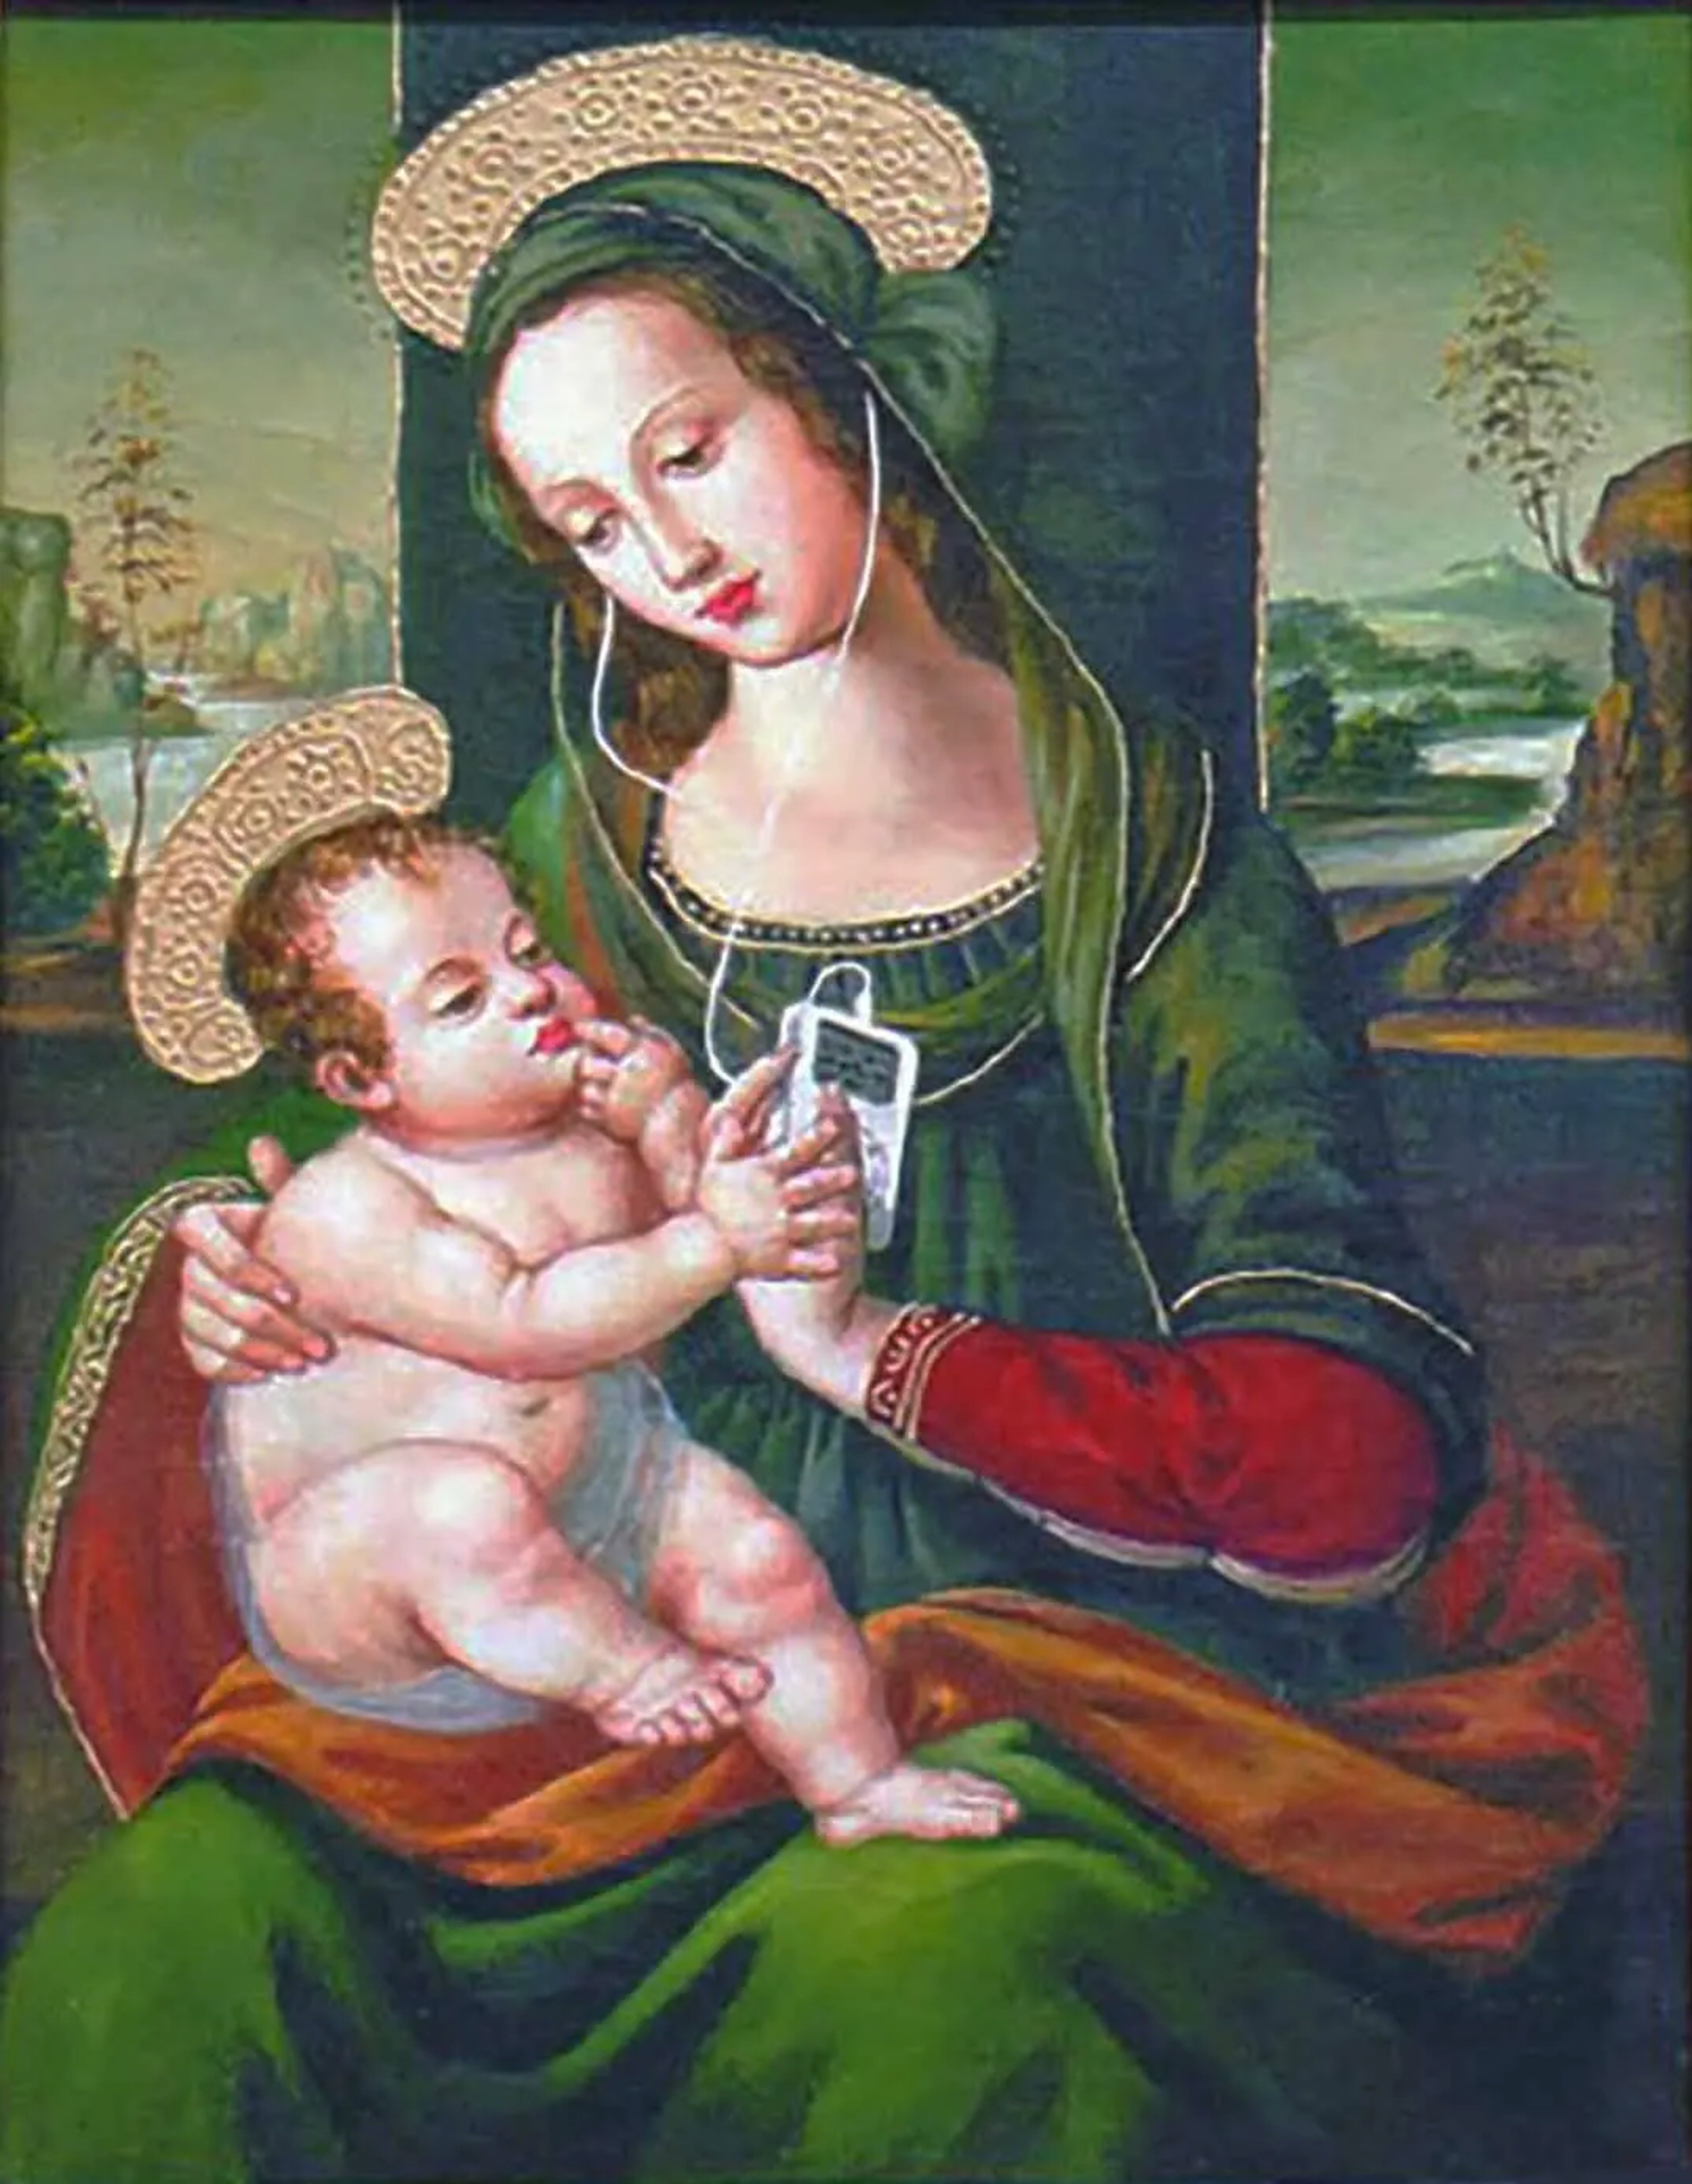 This work by Banksy shoes a traditional, Renaissance-style depiction of the Virgin Mary craddling baby Jesus. She has wired headphones conntected to an iPod on, which the baby is reaching for.